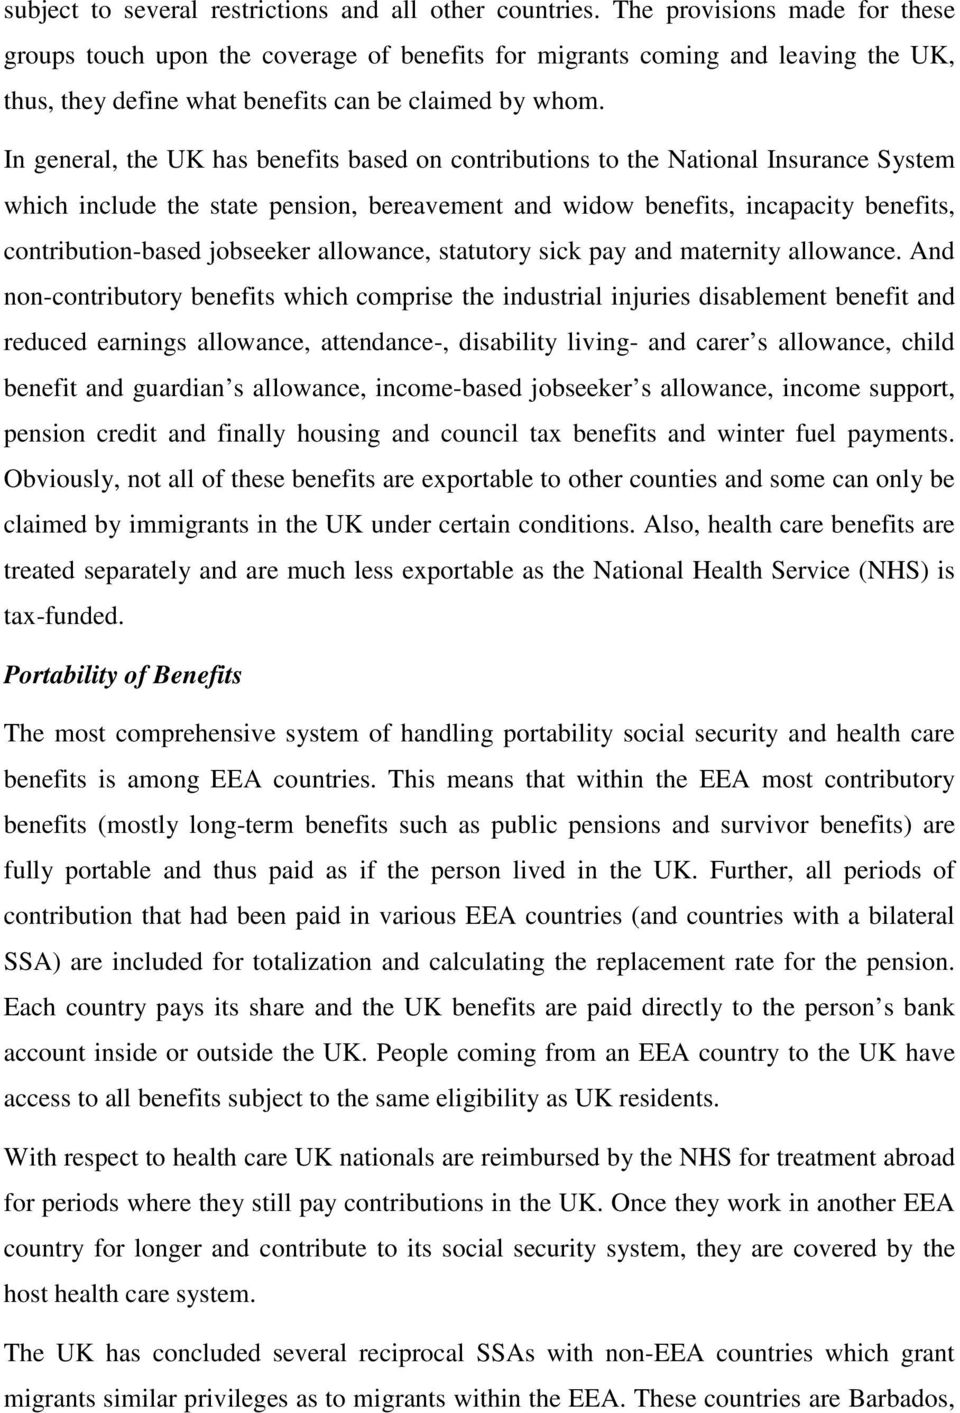 In general, the UK has benefits based on contributions to the National Insurance System which include the state pension, bereavement and widow benefits, incapacity benefits, contribution-based